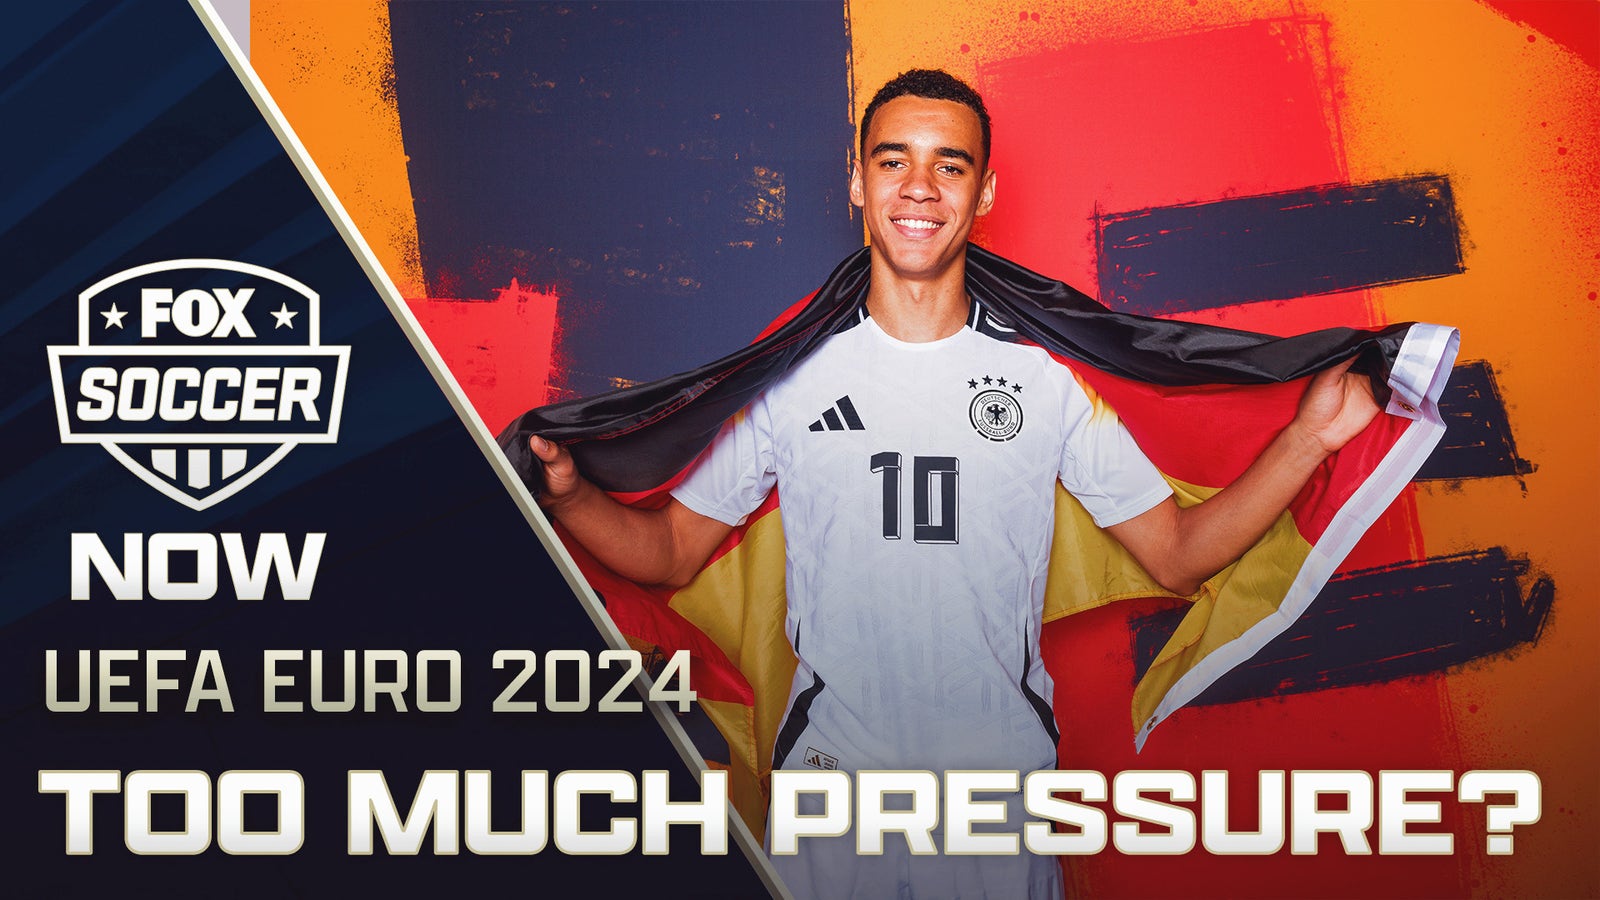 How much pressure is Germany facing to win the UEFA Euro 2024?